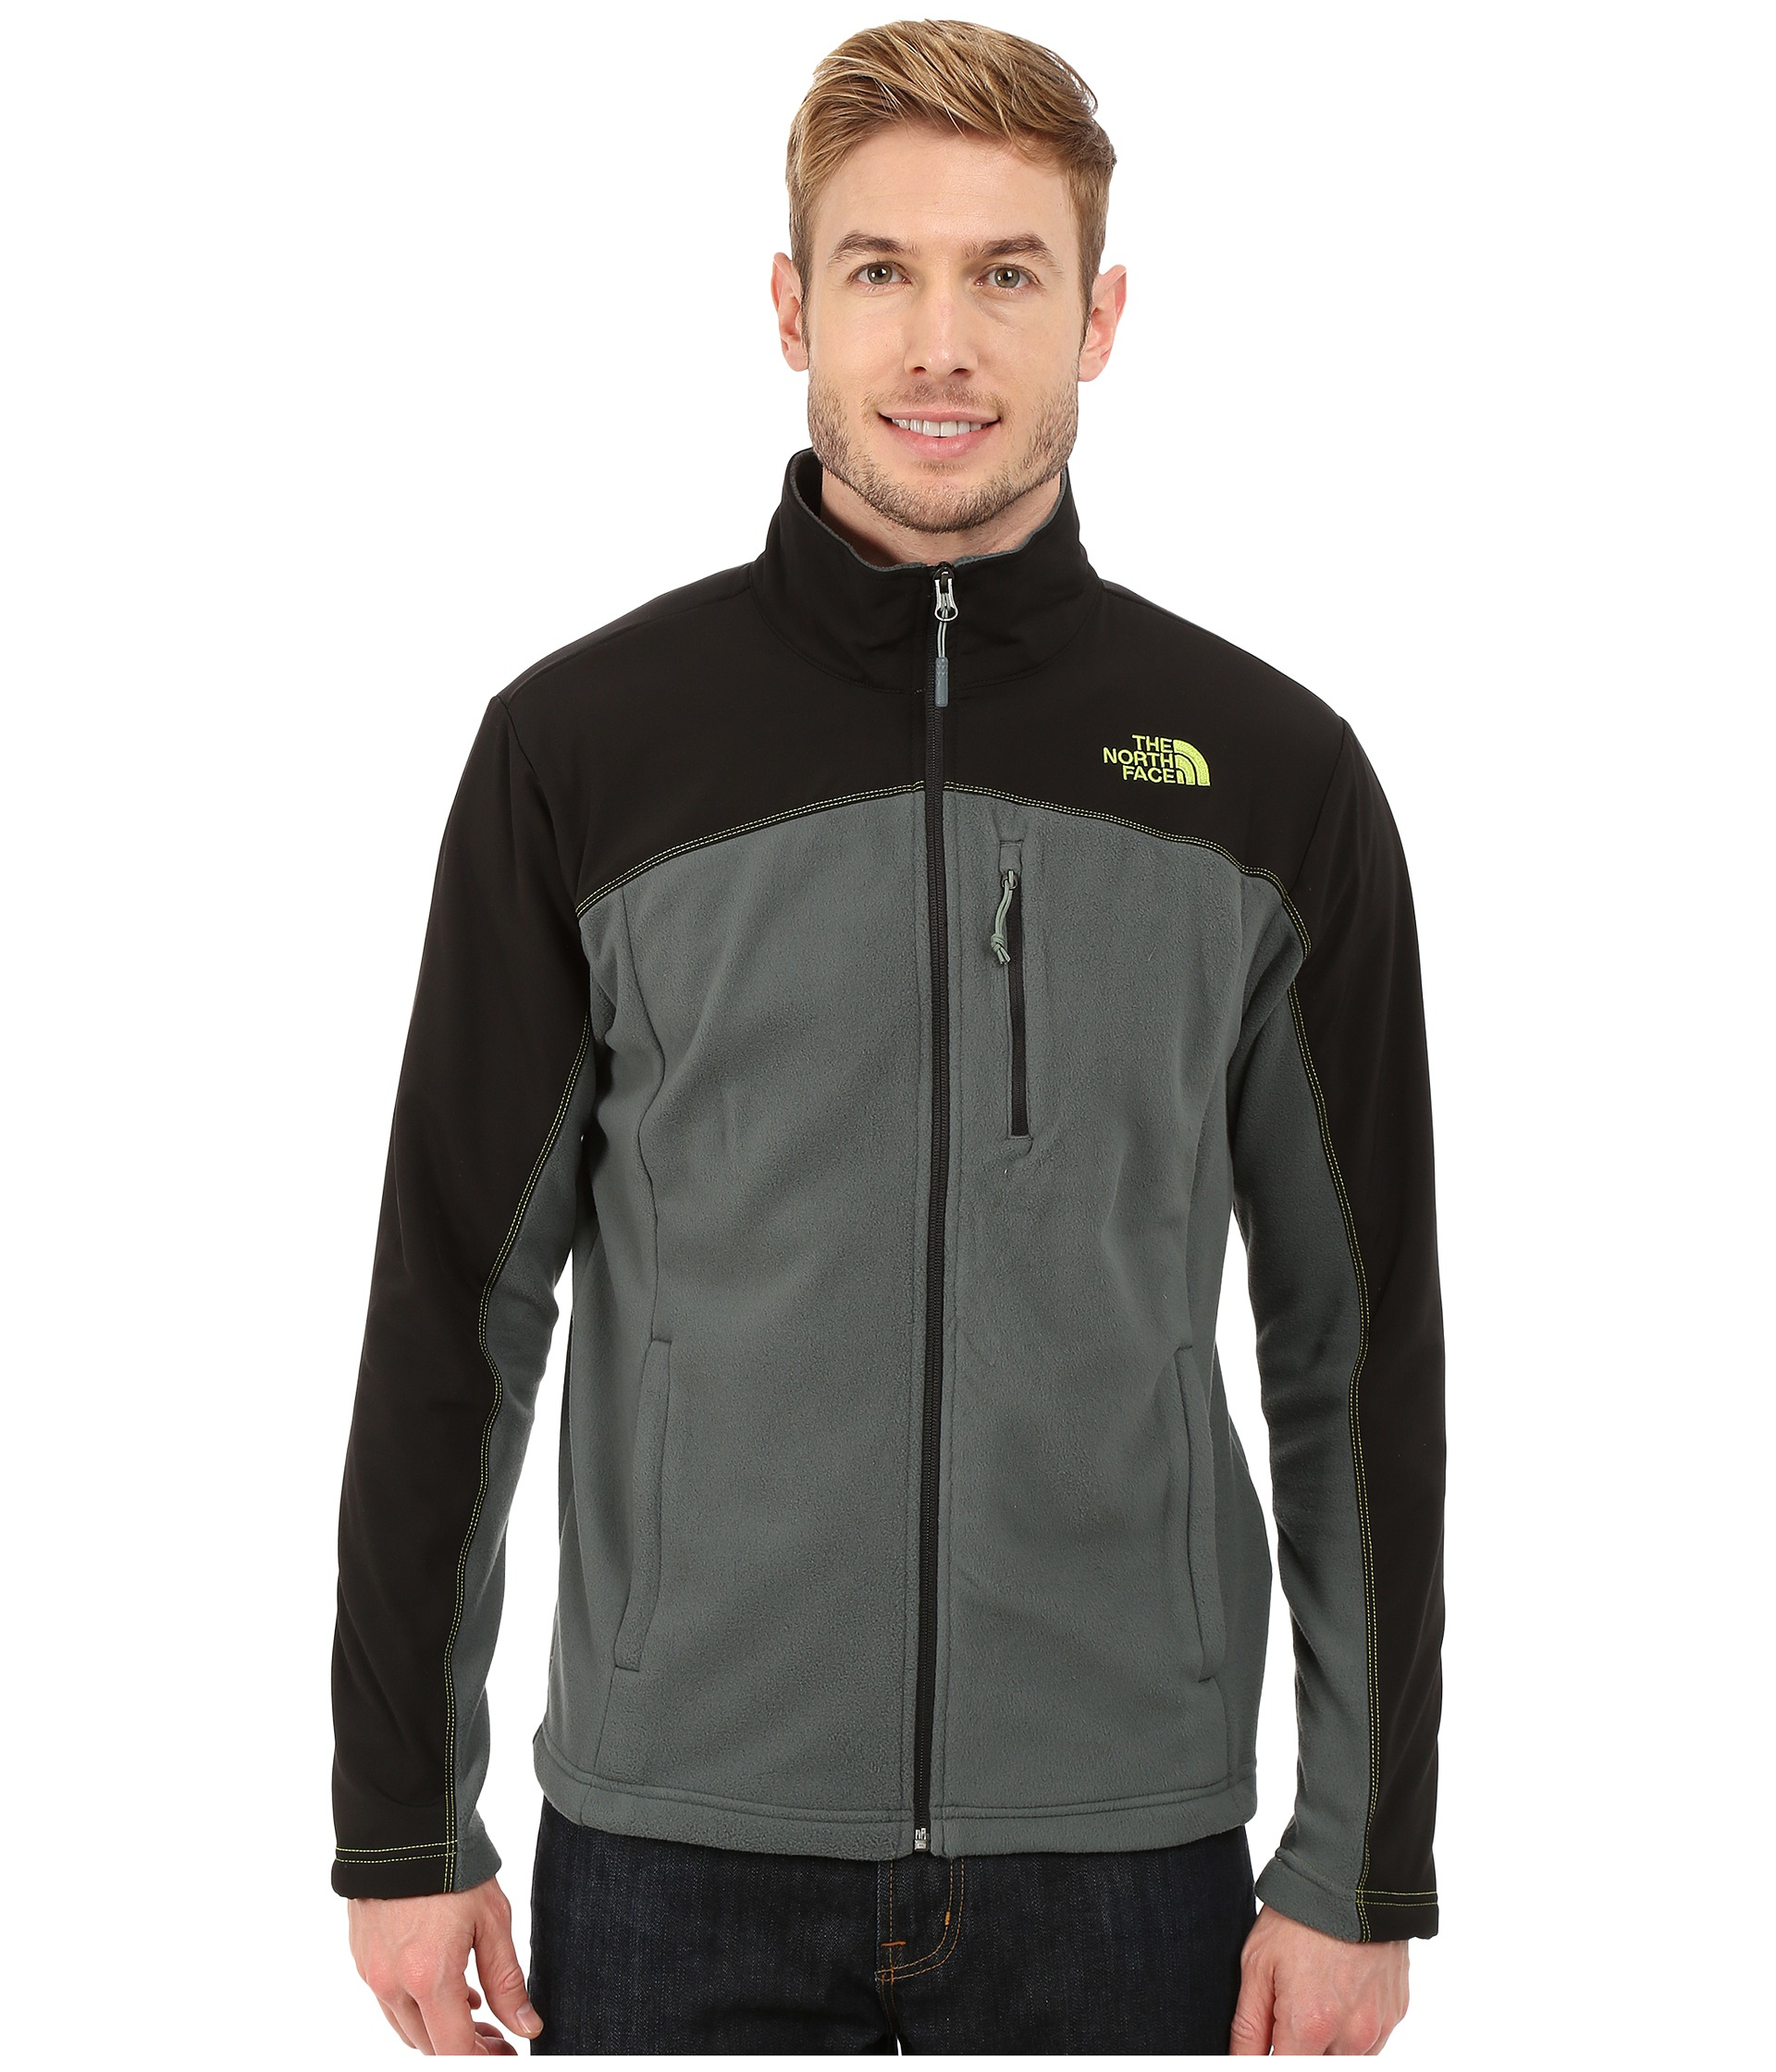 Lyst - The North Face Glacier Trail Jacket in Green for Men